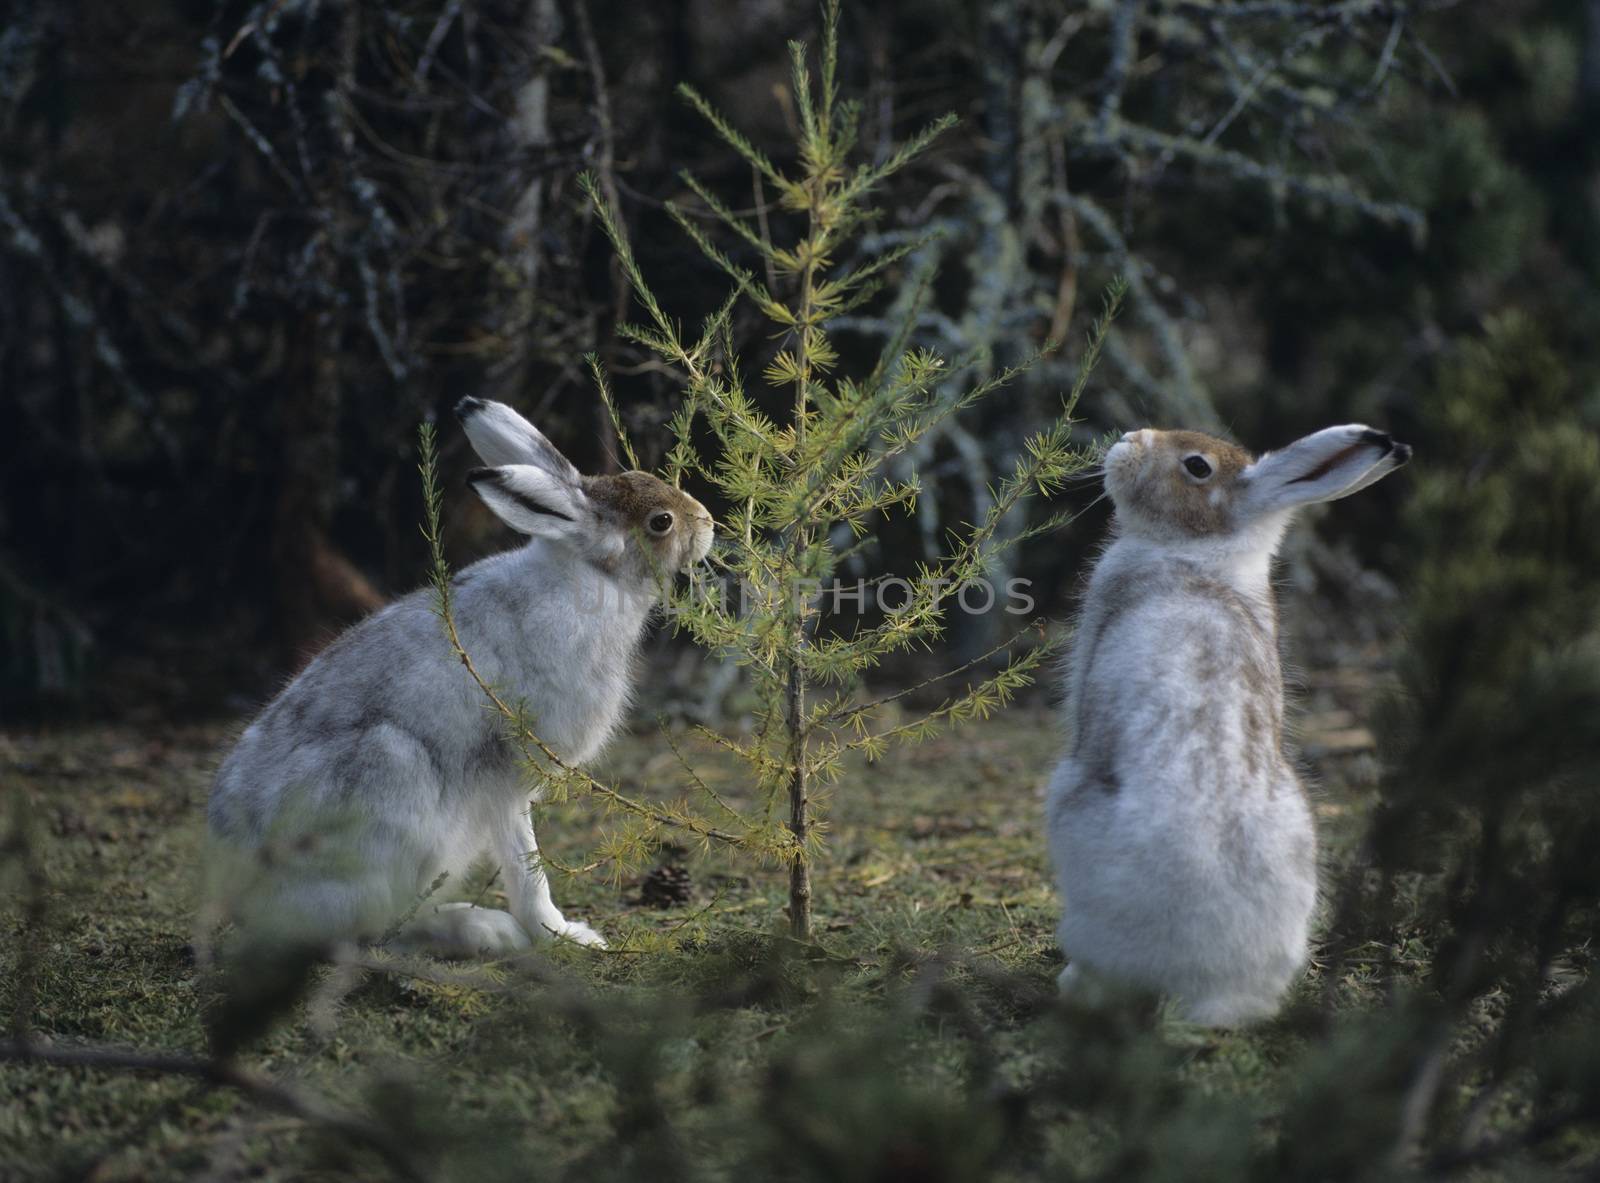 Two Hares Nibbling on Small Tree